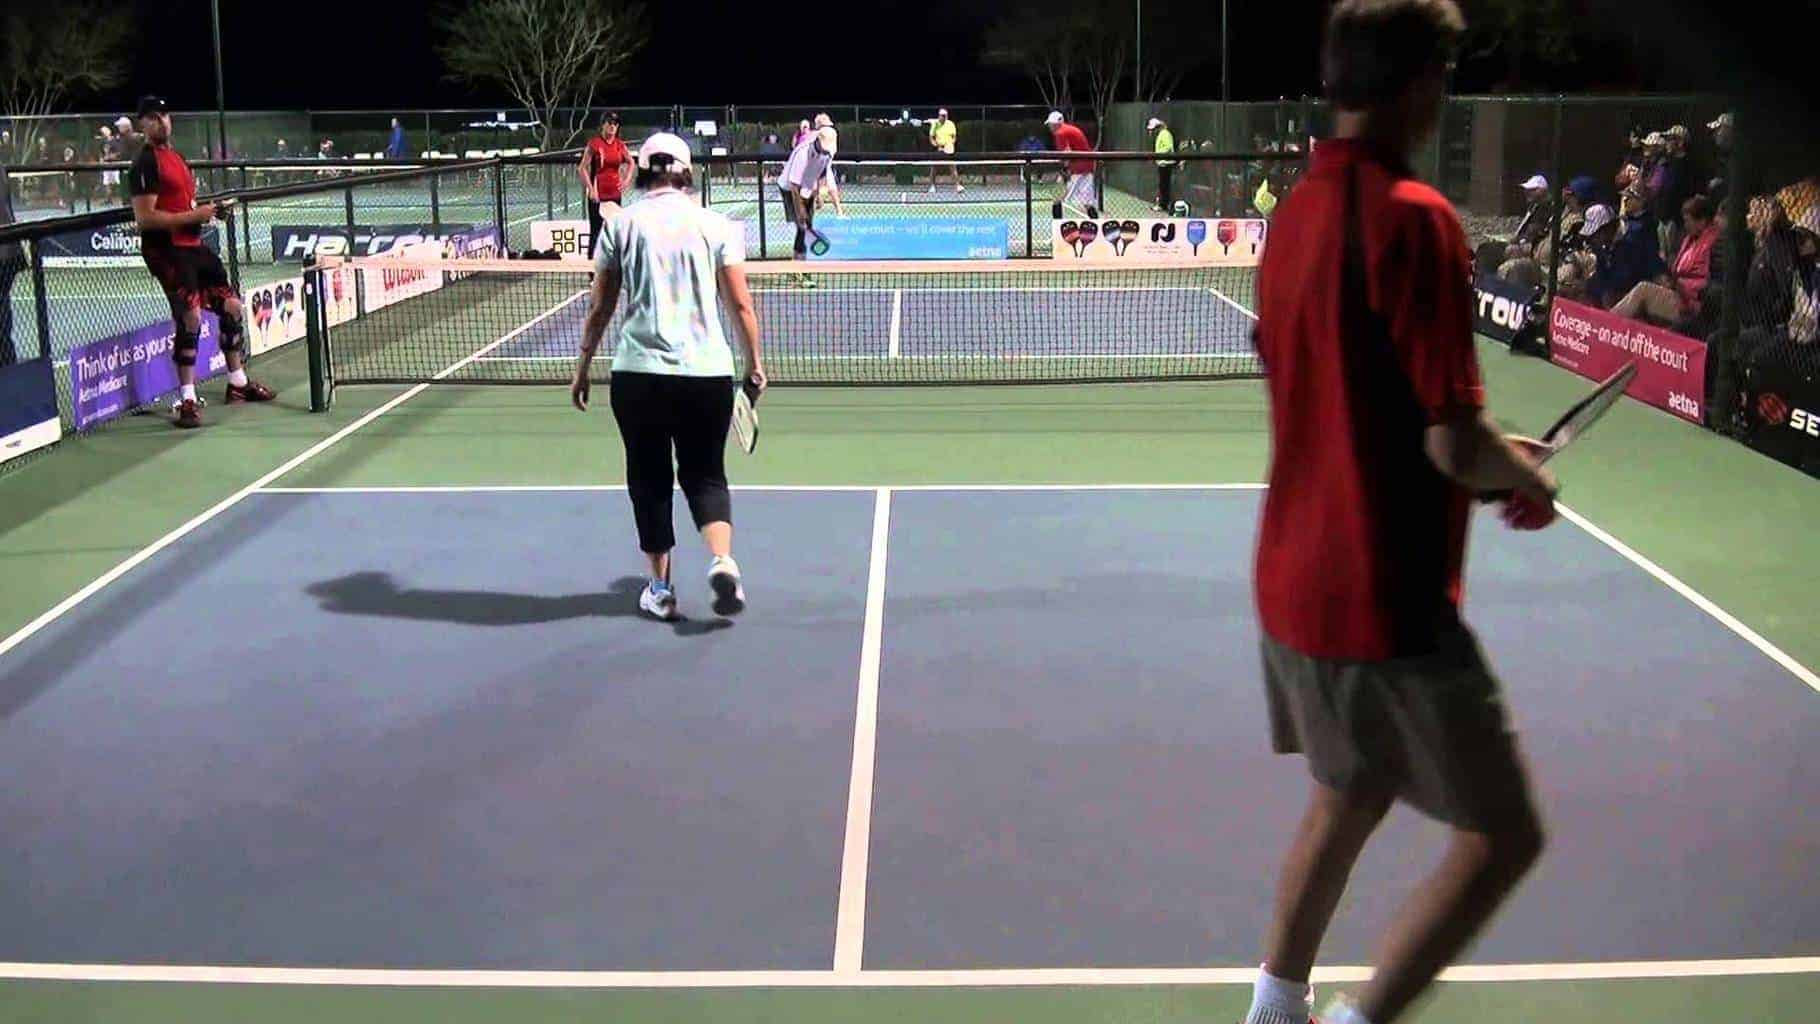 Gold Mixed Doubles 50+ Match – 2015 USAPA Nationals VII